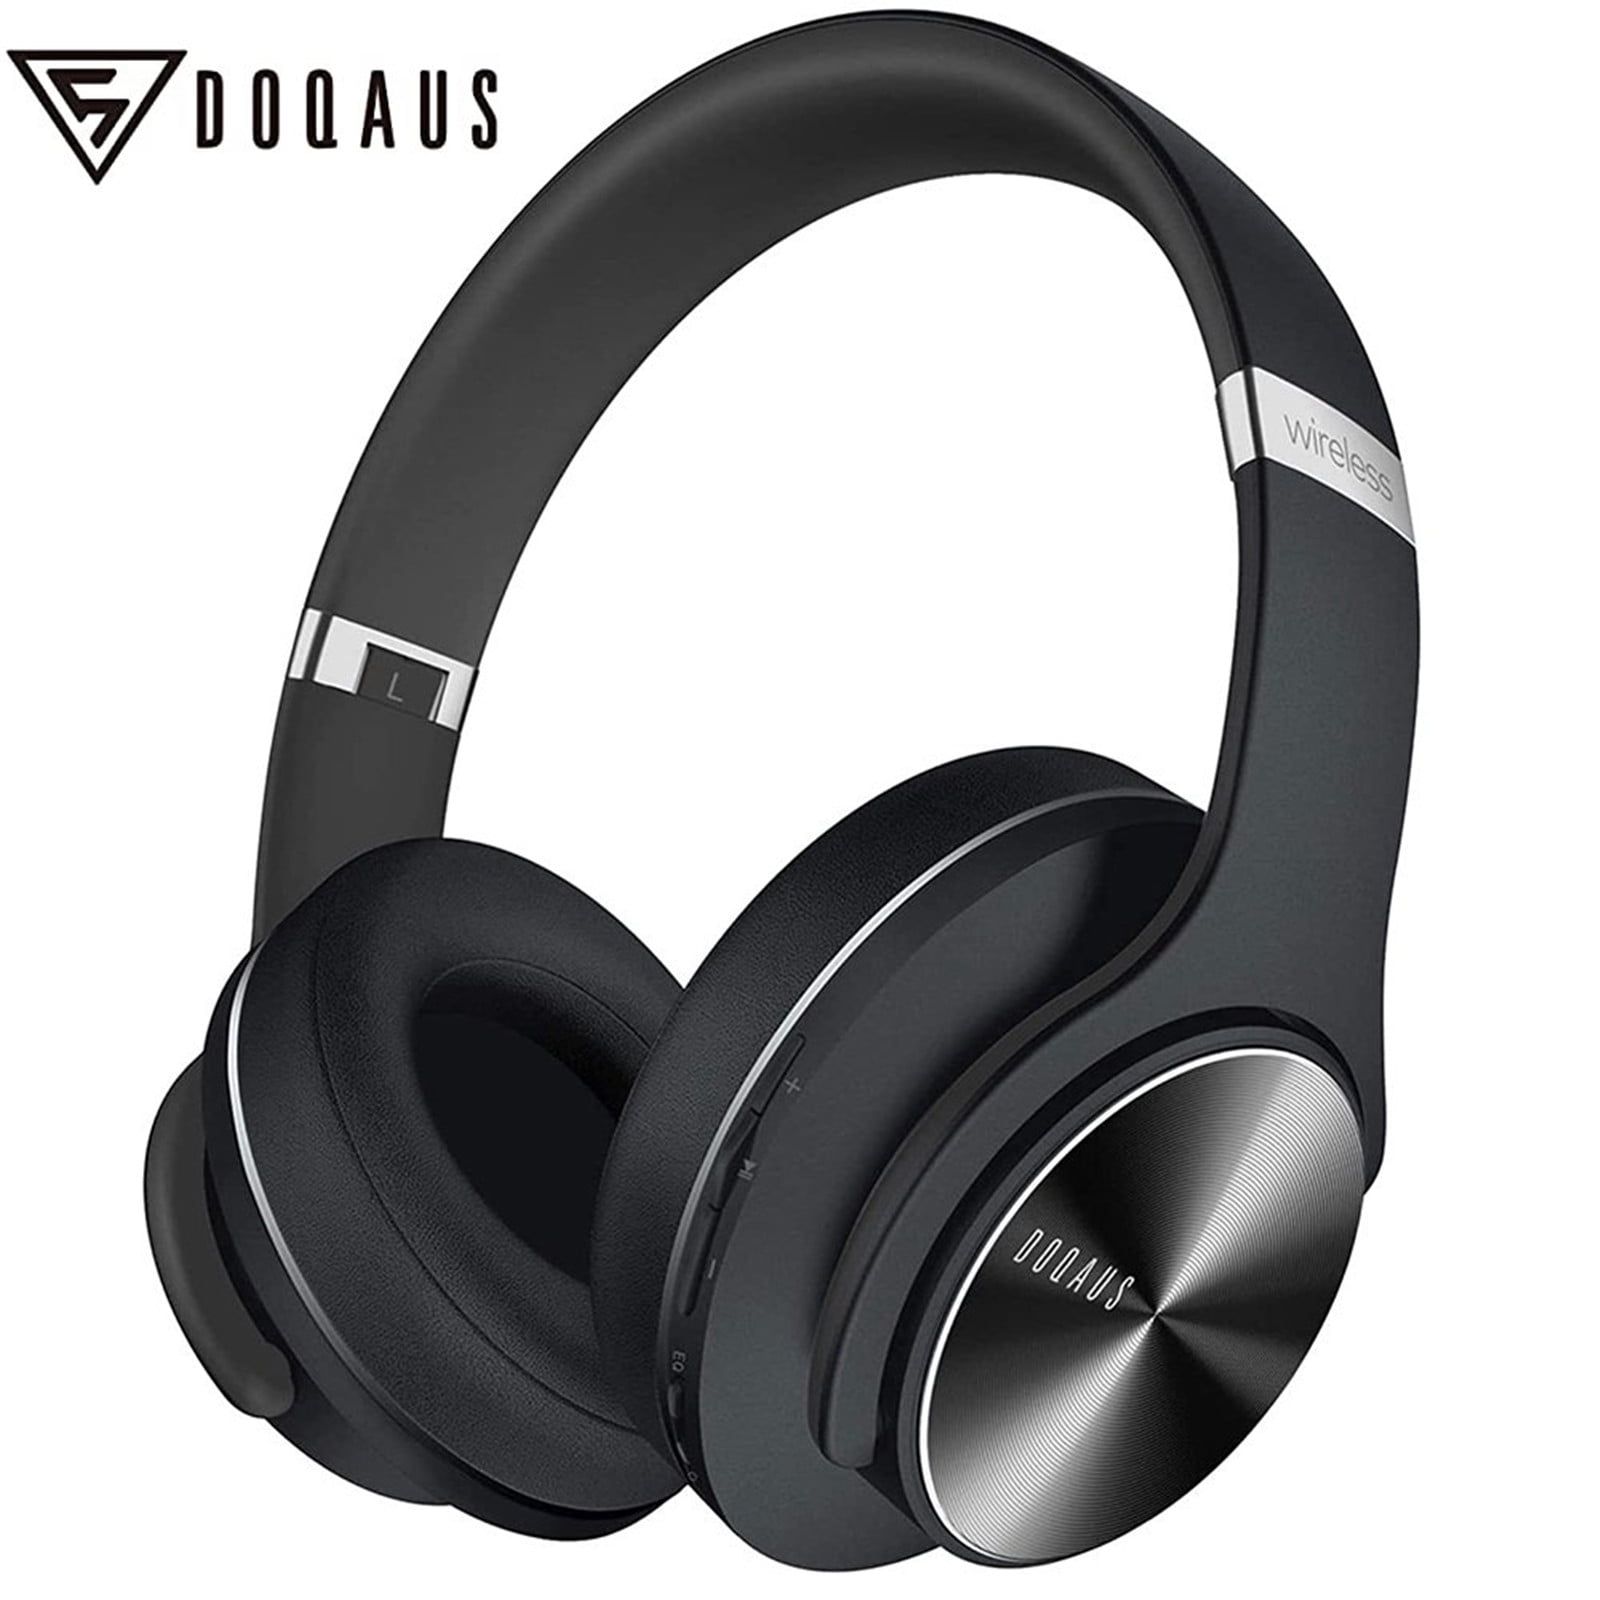 DOQAUS Bluetooth Headphones Over Ear, Bluetooth Wireless Headphones with  Noise Cancellation Foldable Stereo Earphones Wireless Headphones Over Ear  for